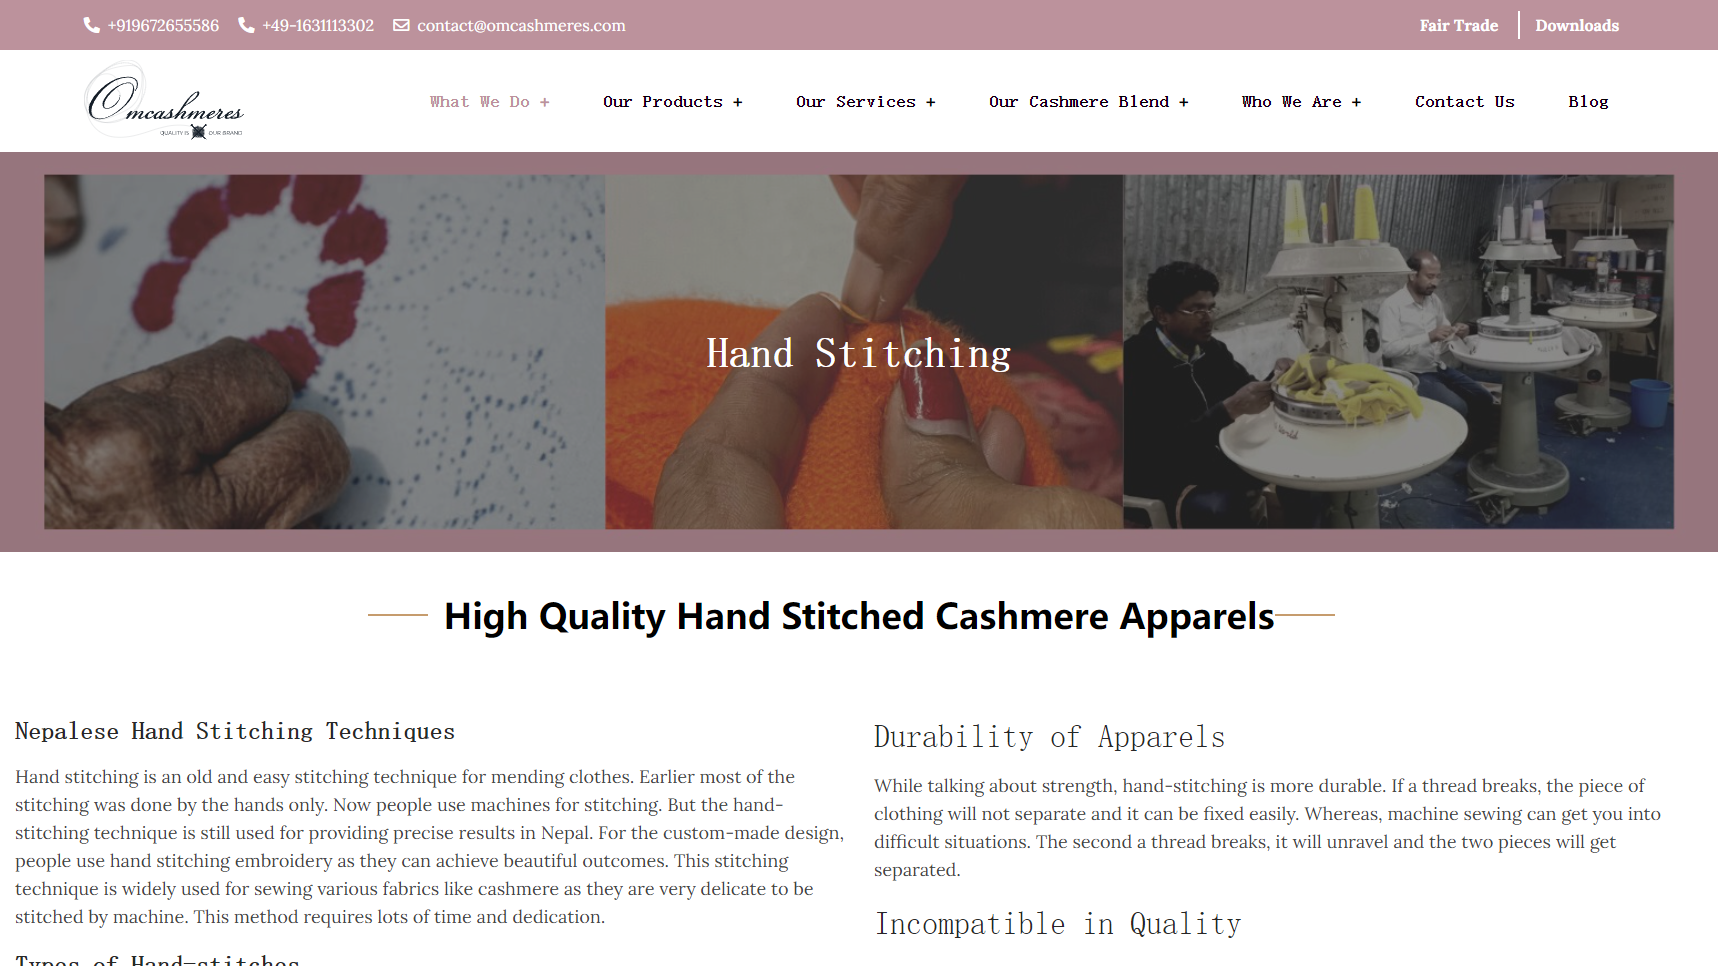 OMCashmeres - Cashmere Sweater Manufacturer